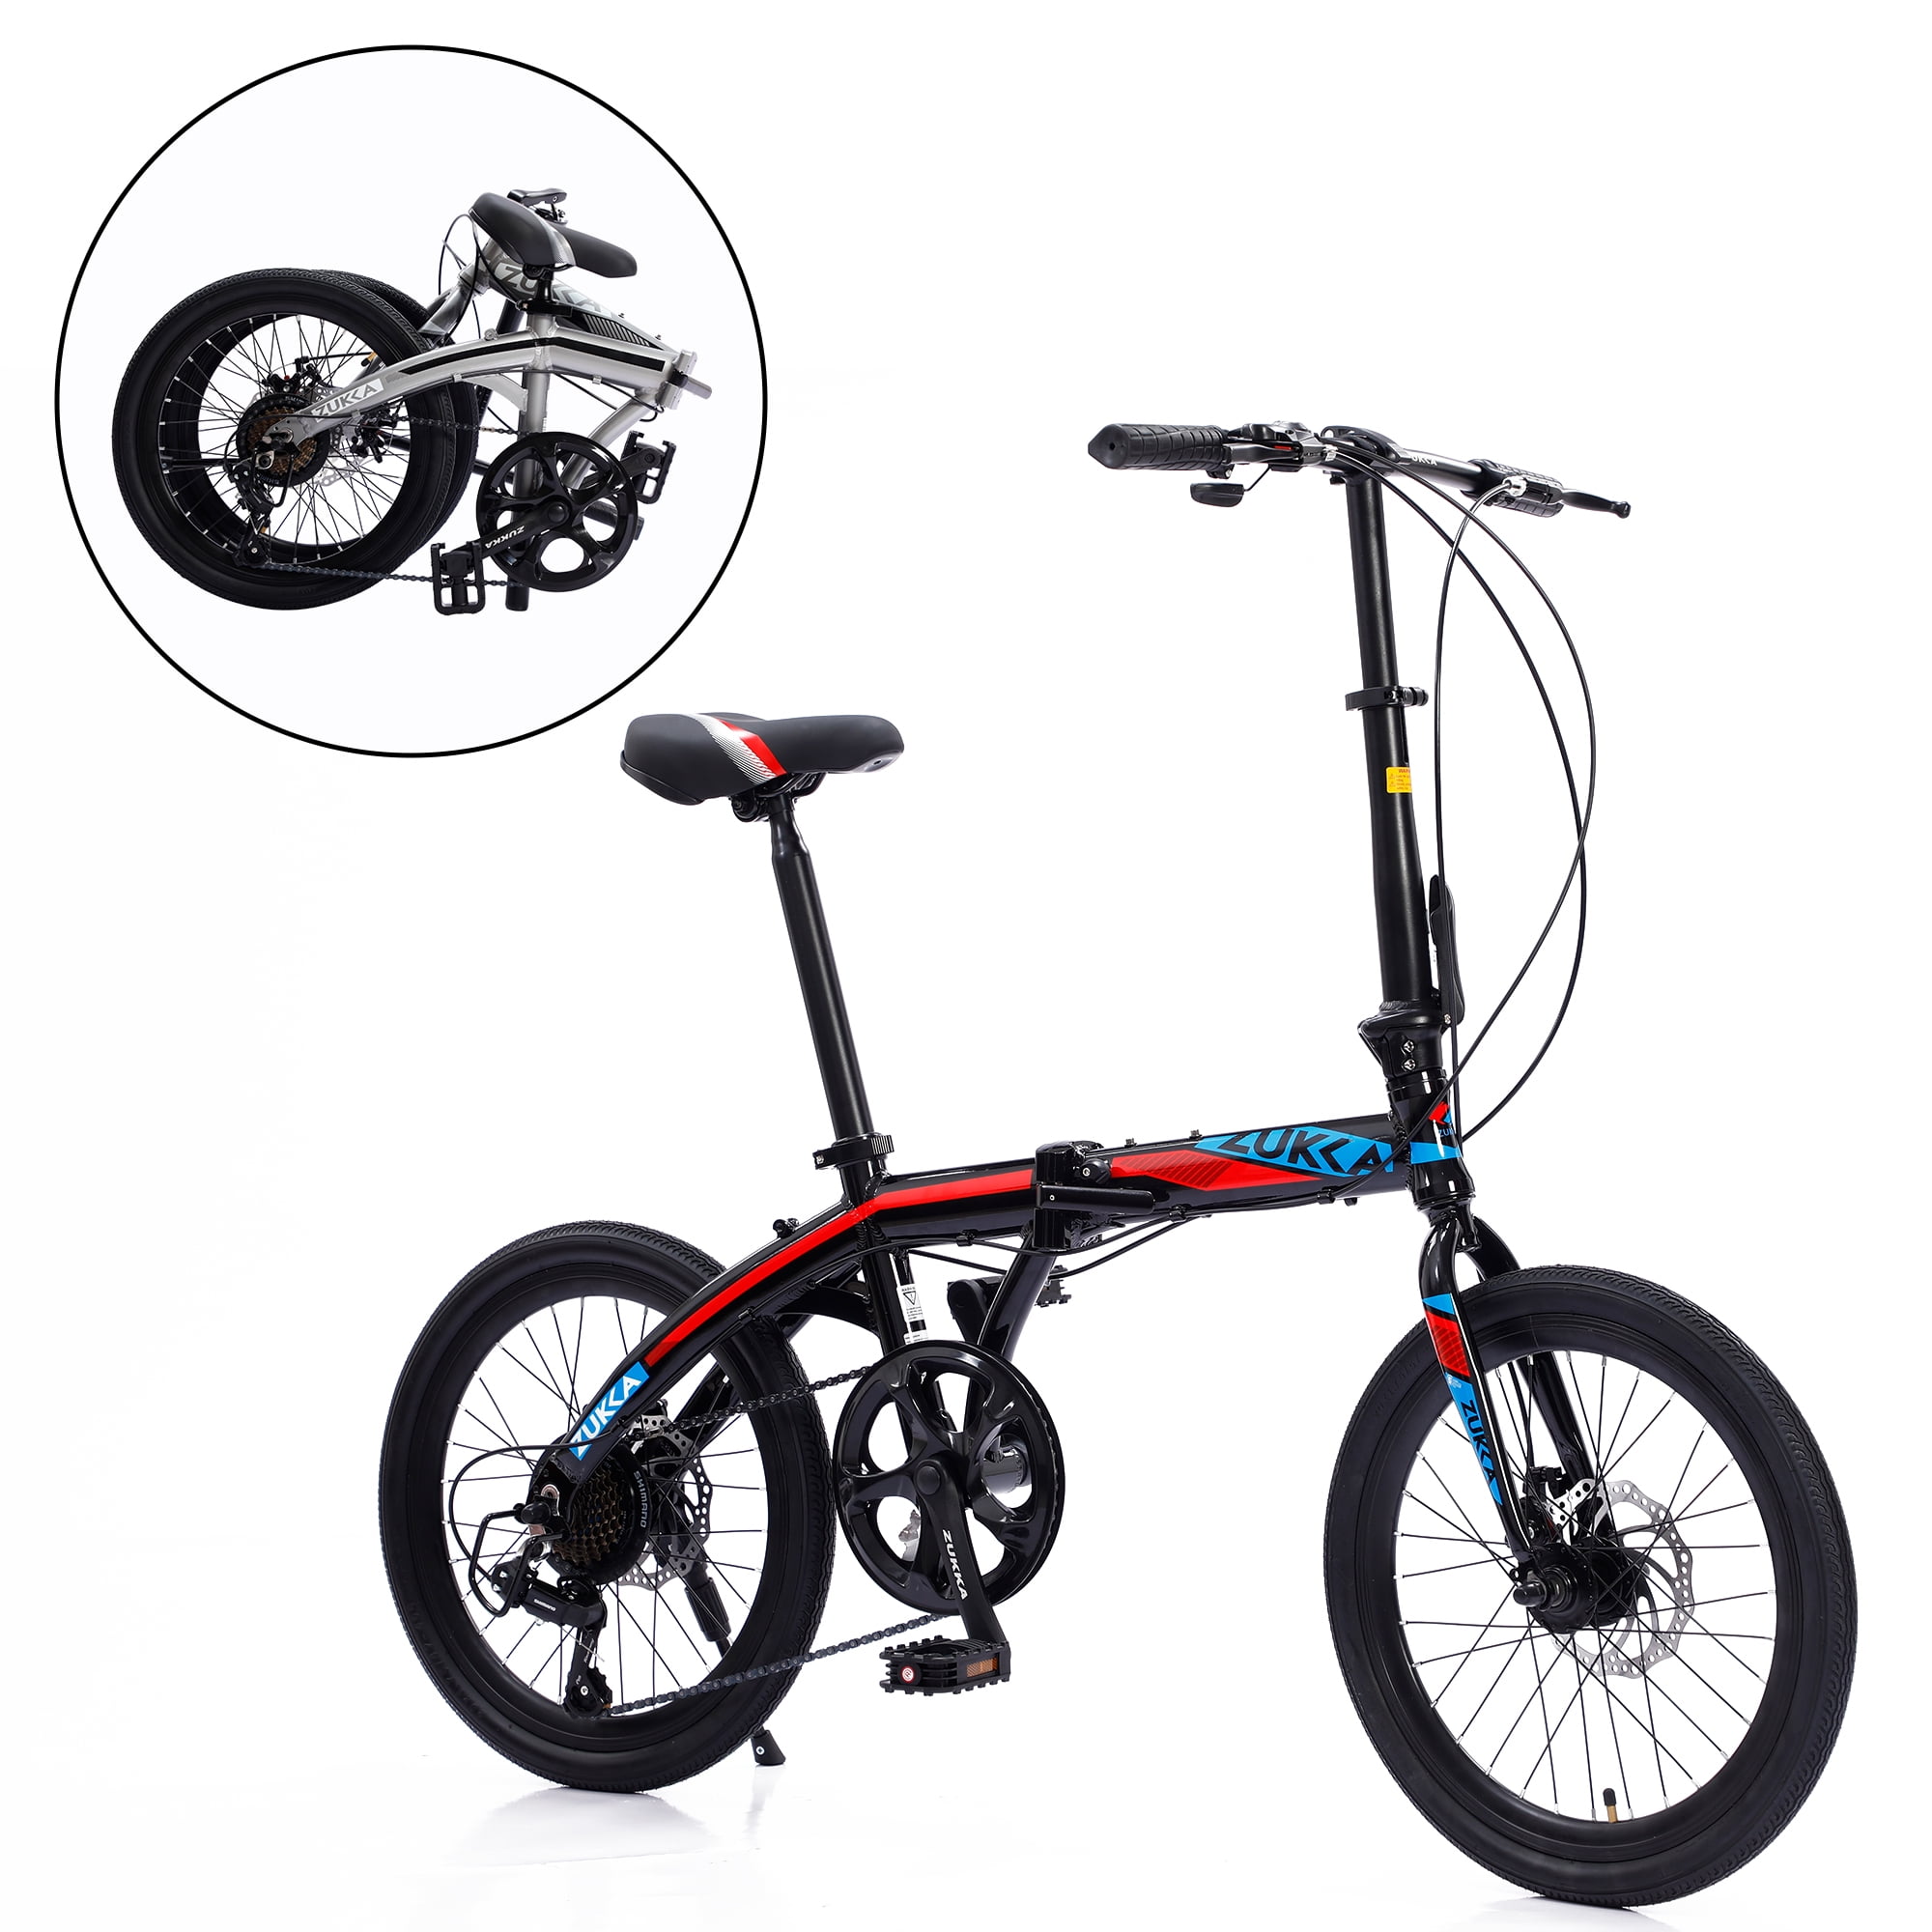 Clearance! 20 Inch Folding Bike with 8 Speed, Lightweight Foldable Bikes,  Commuter Bicycle for Adults Adjustable Seat and Dual Brakes for Men Women